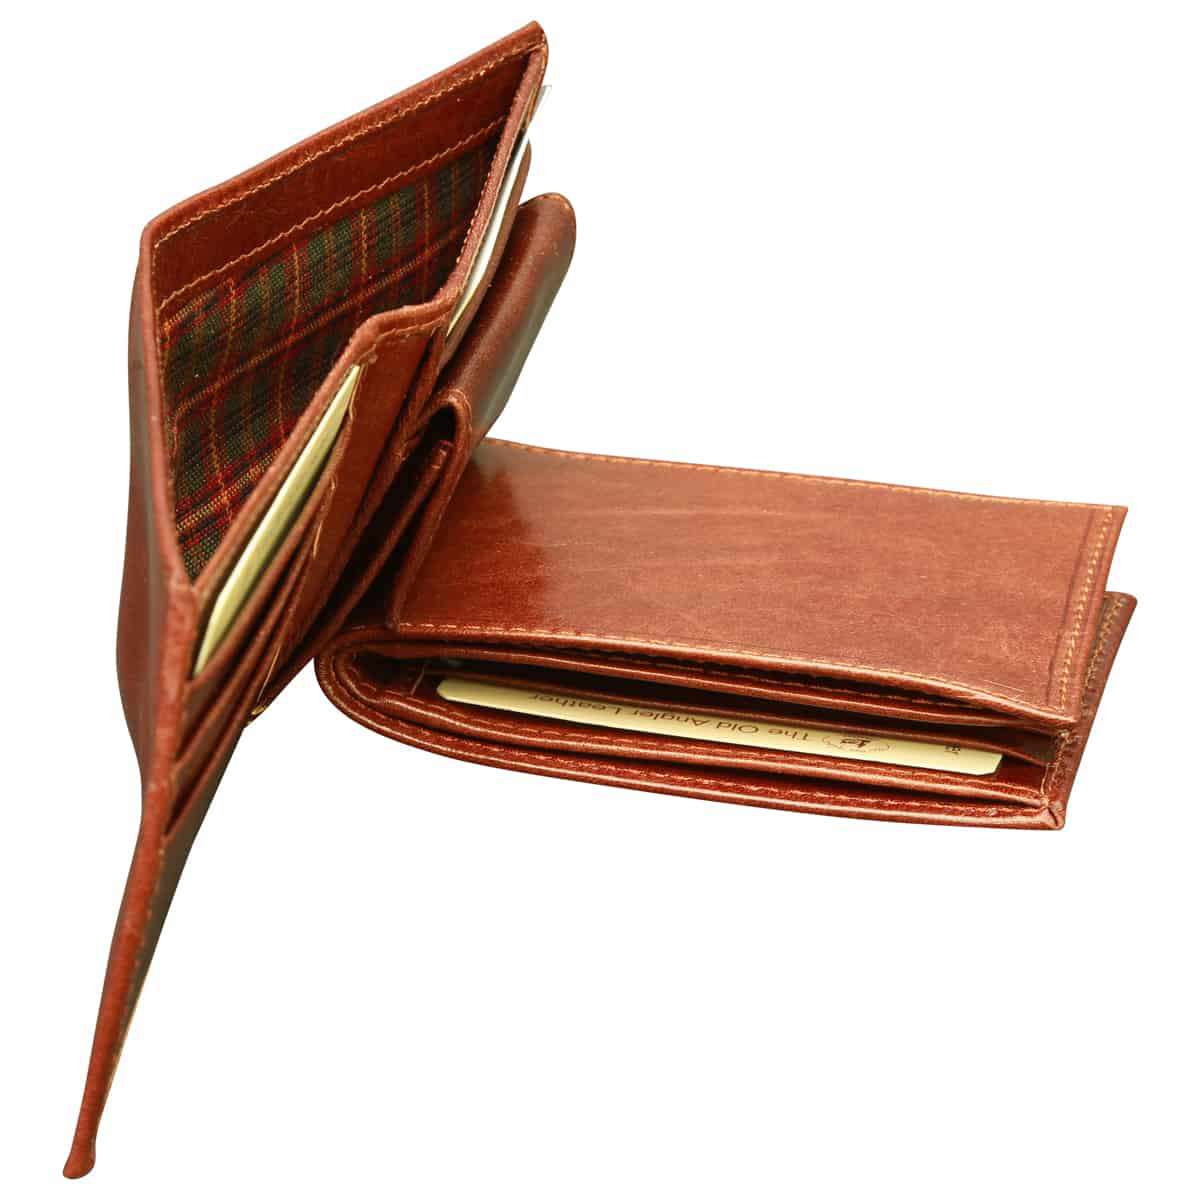 Leather wallet for men - Brown | 802505MA US | Old Angler Firenze